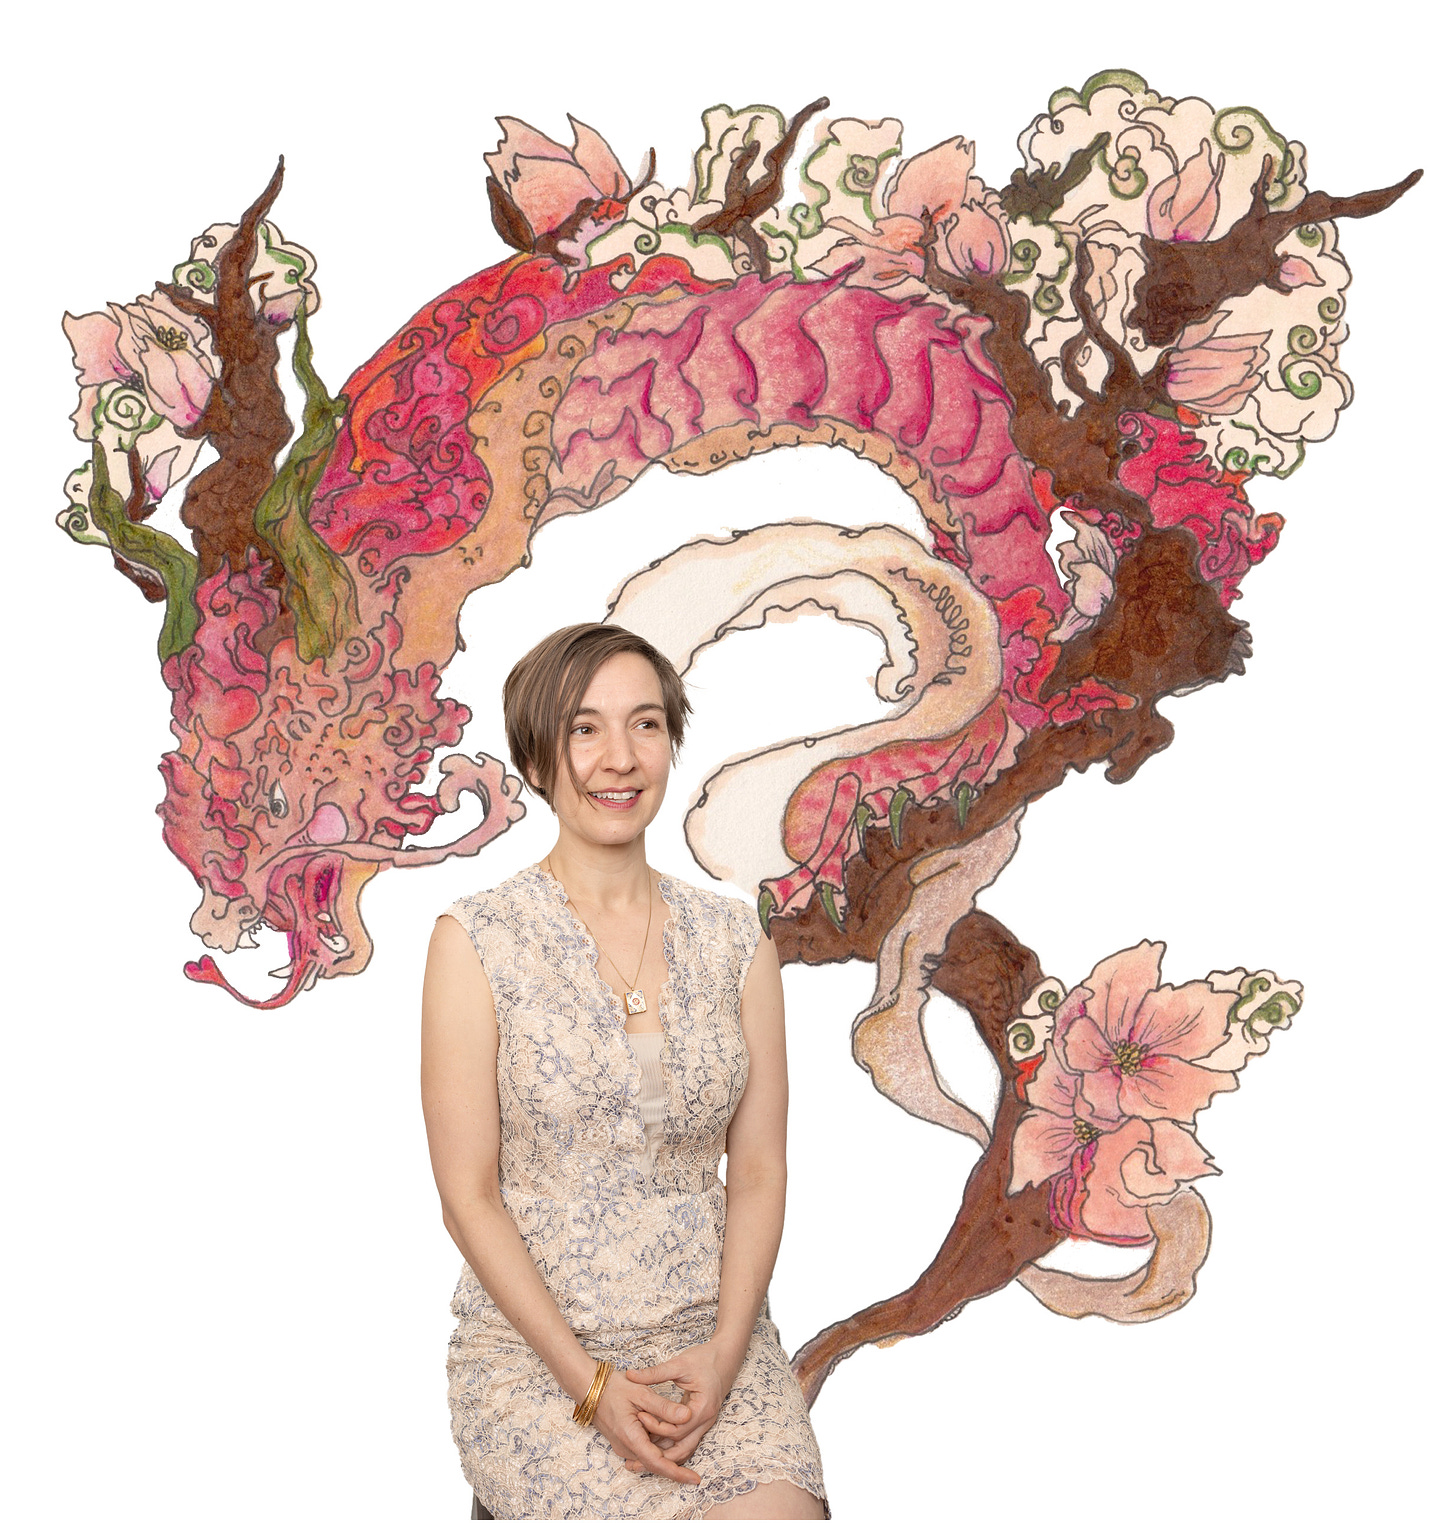 Mitra seated in a white dress with an illustrated dragon in pink and red tones